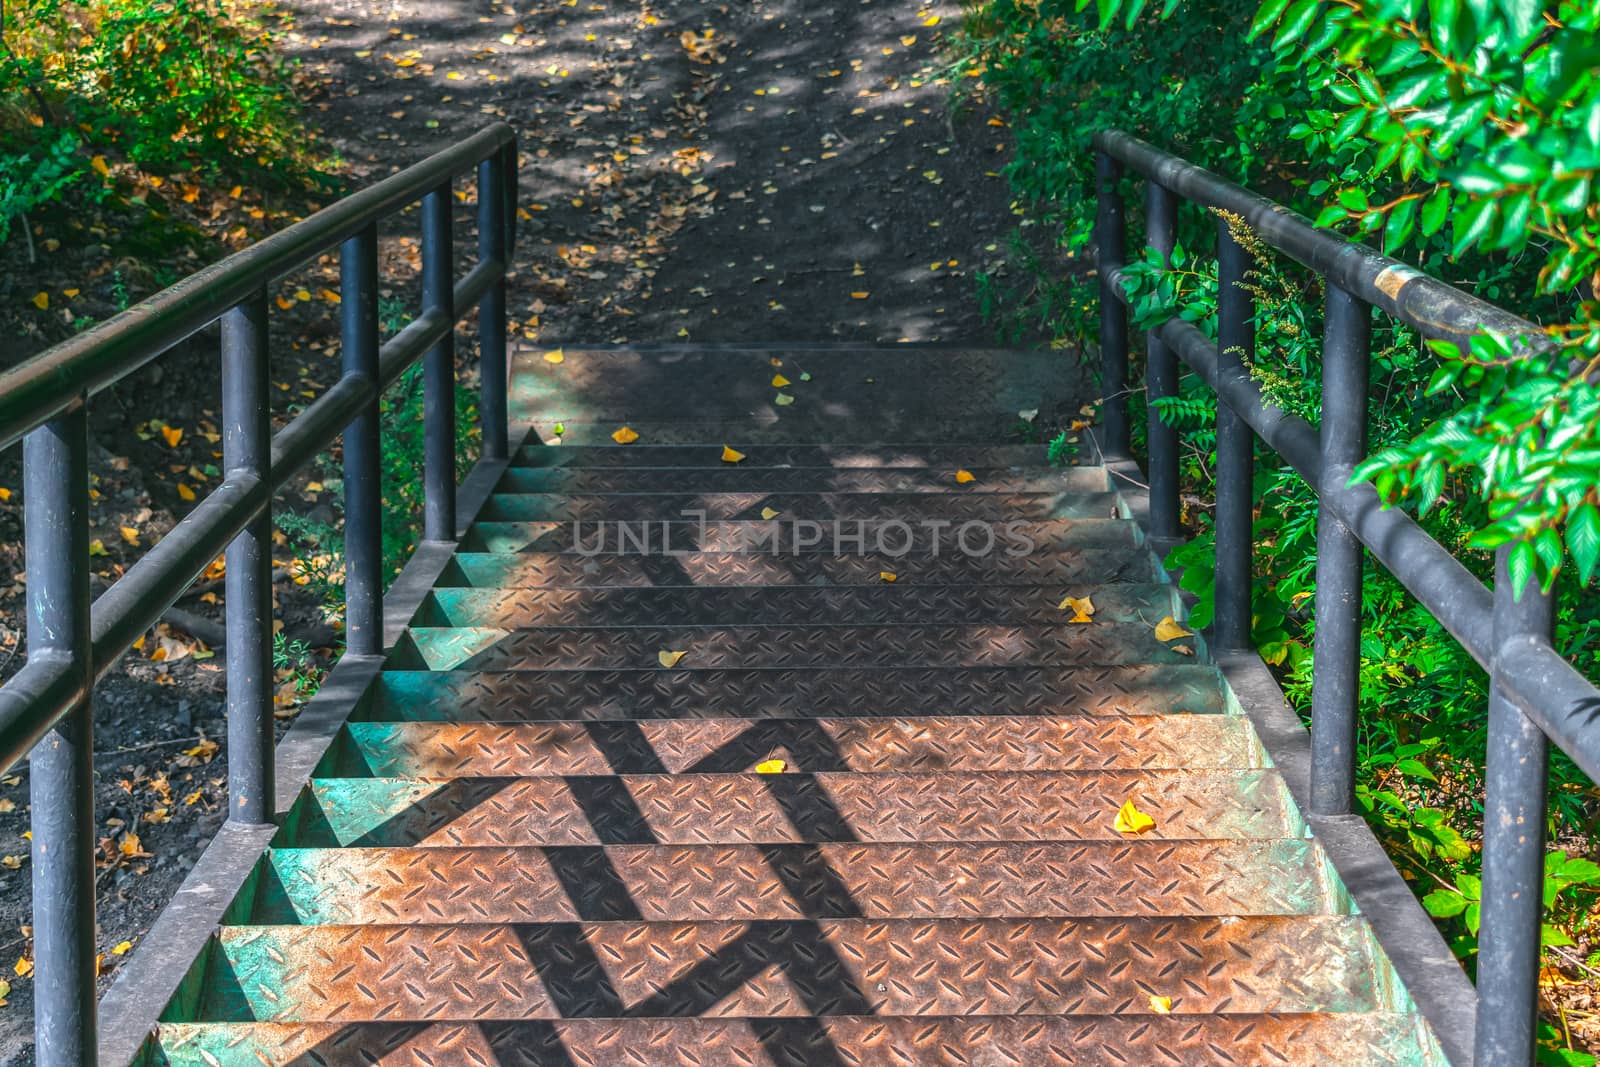 Descending an old and rusty iron staircase to an autumn park with still green leaves on the trees